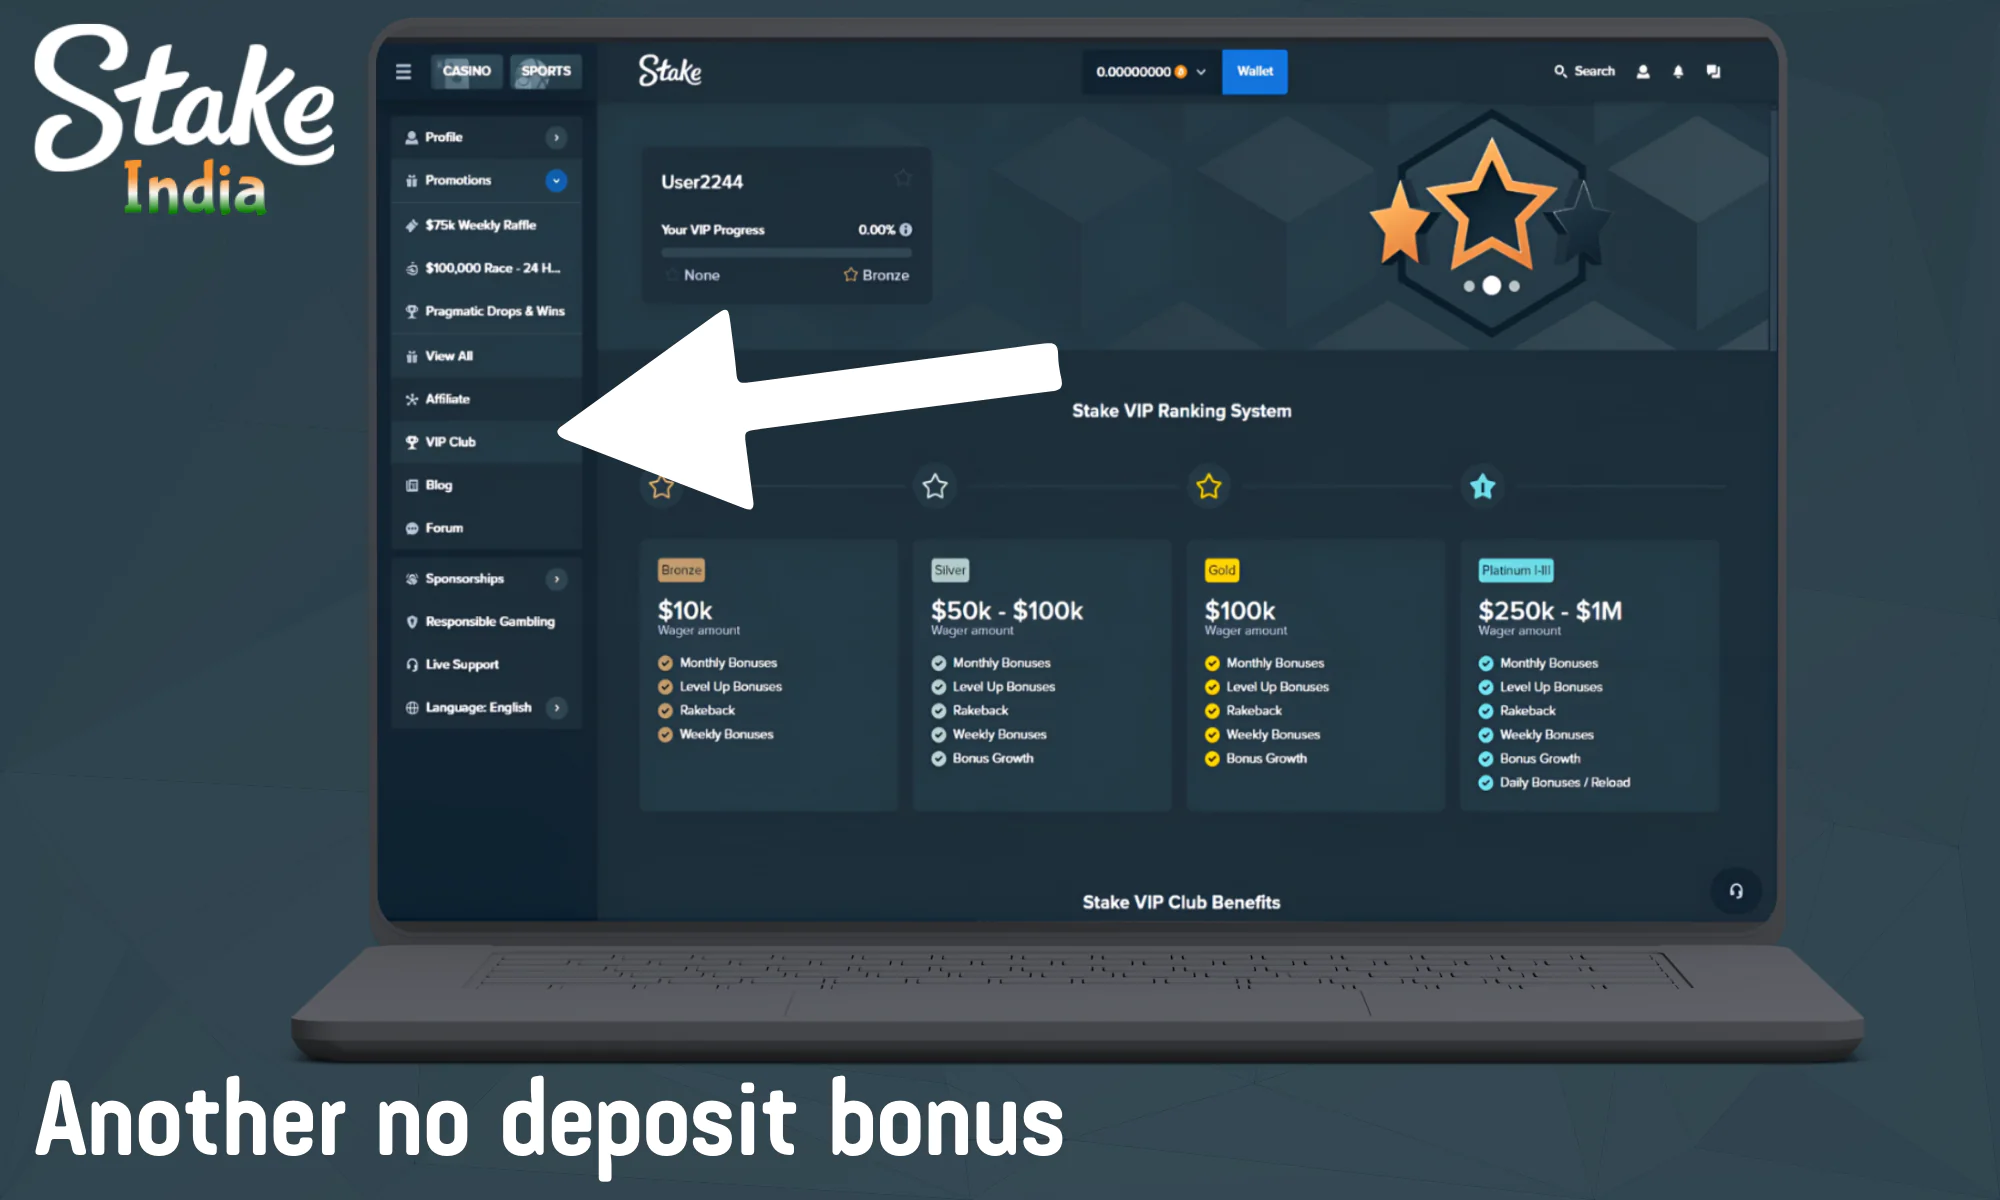 Stake also offers birthday and account verification bonuses